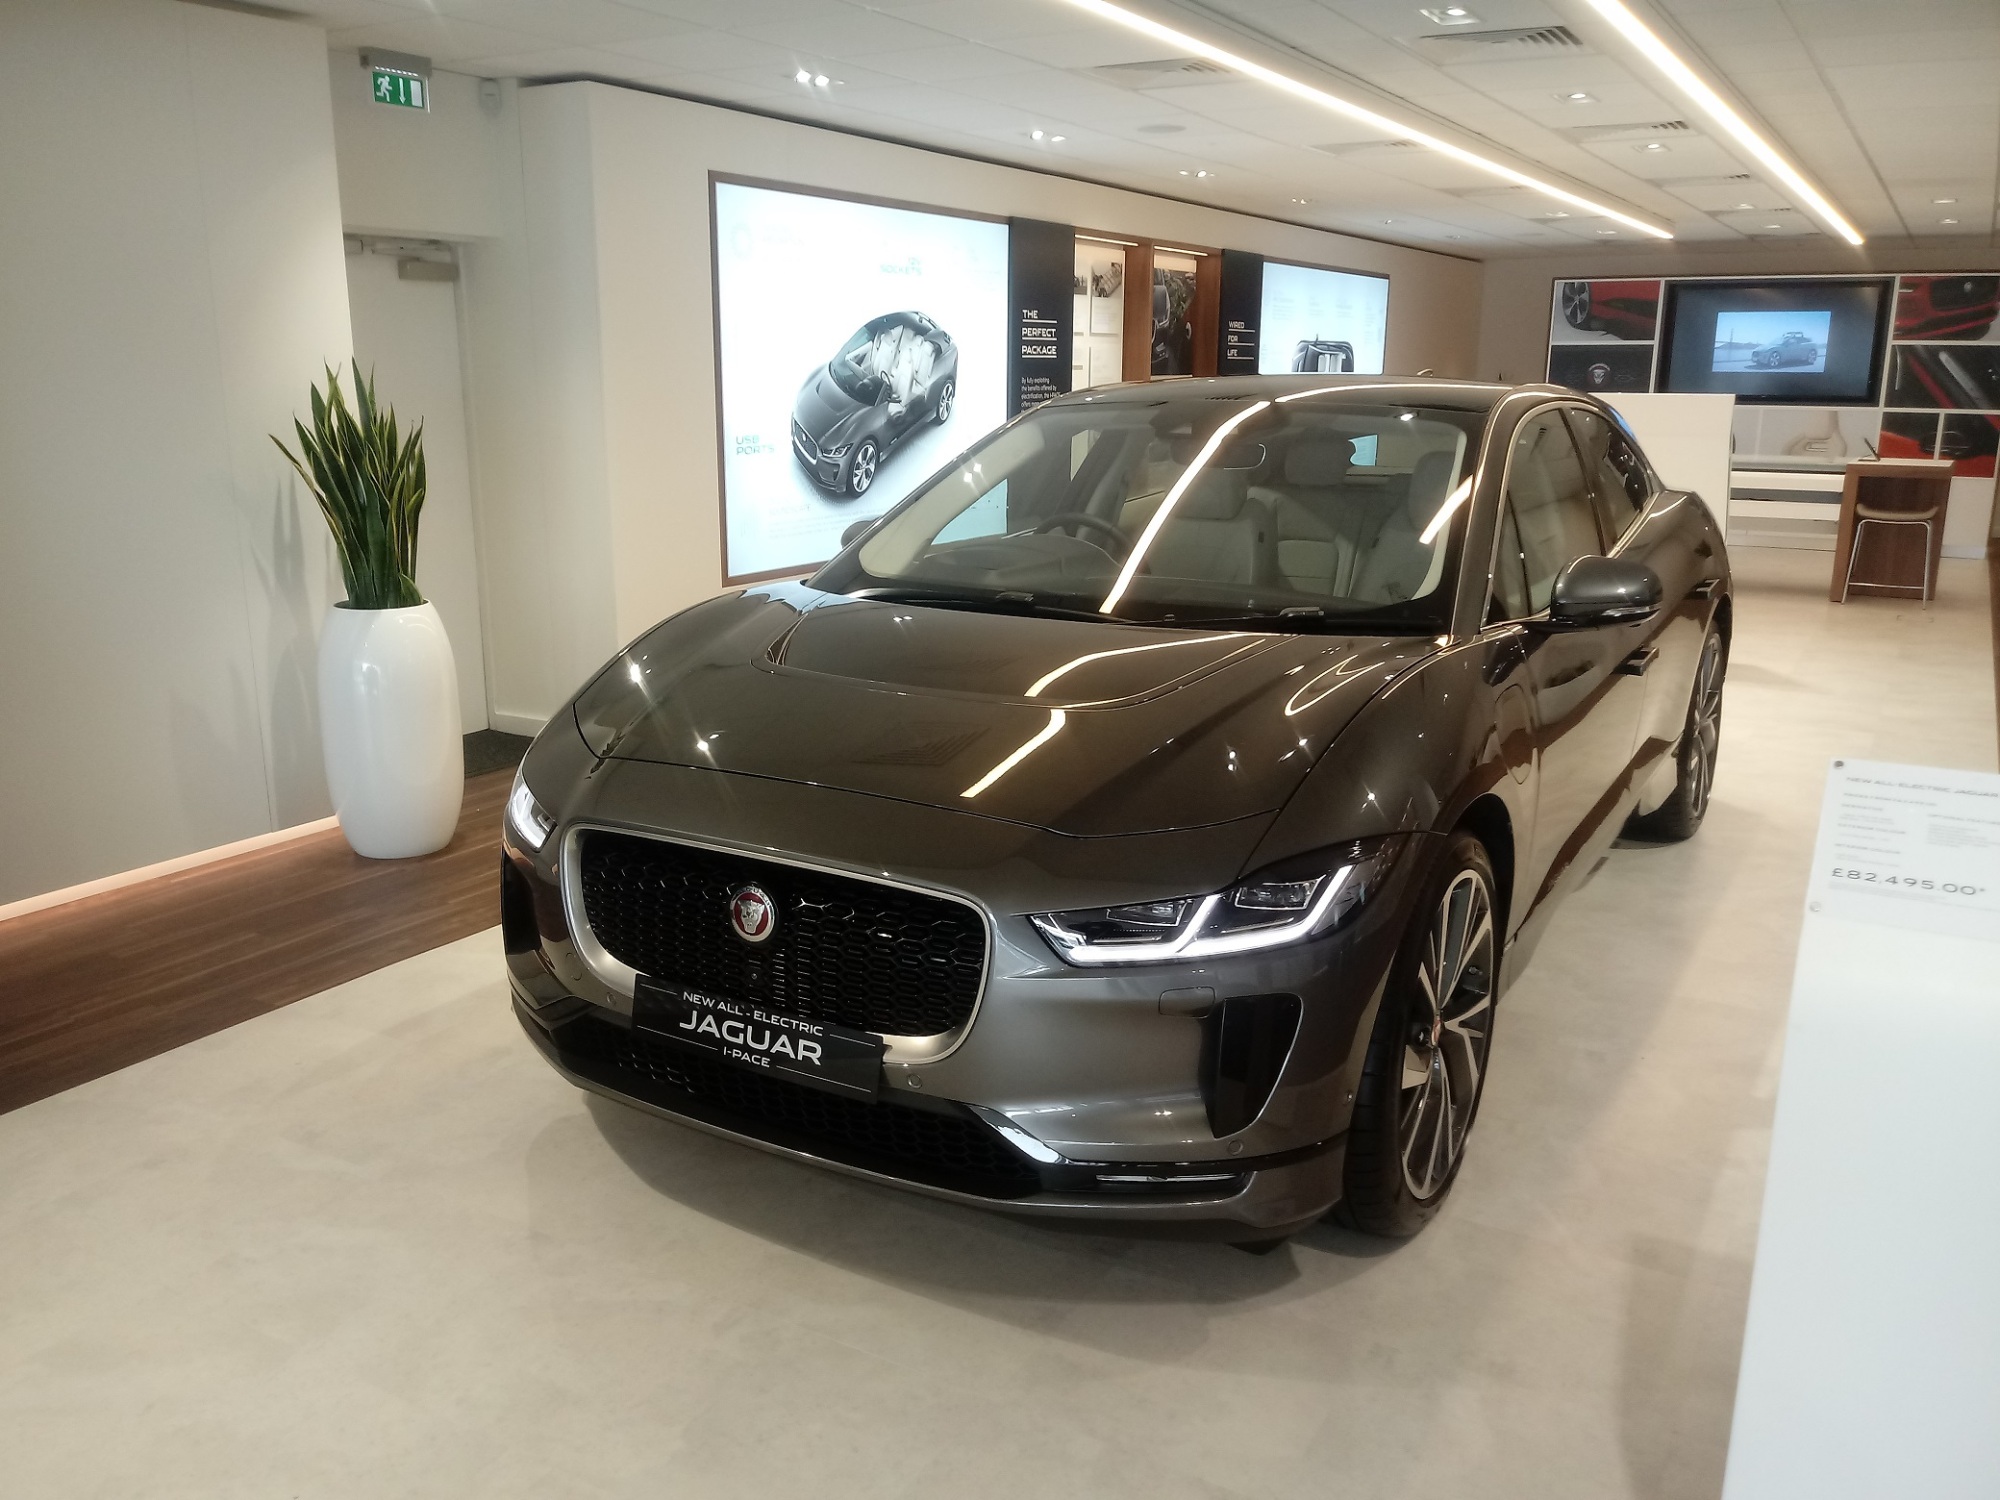 A sneak preview of Jaguar's latest all electric vehicle